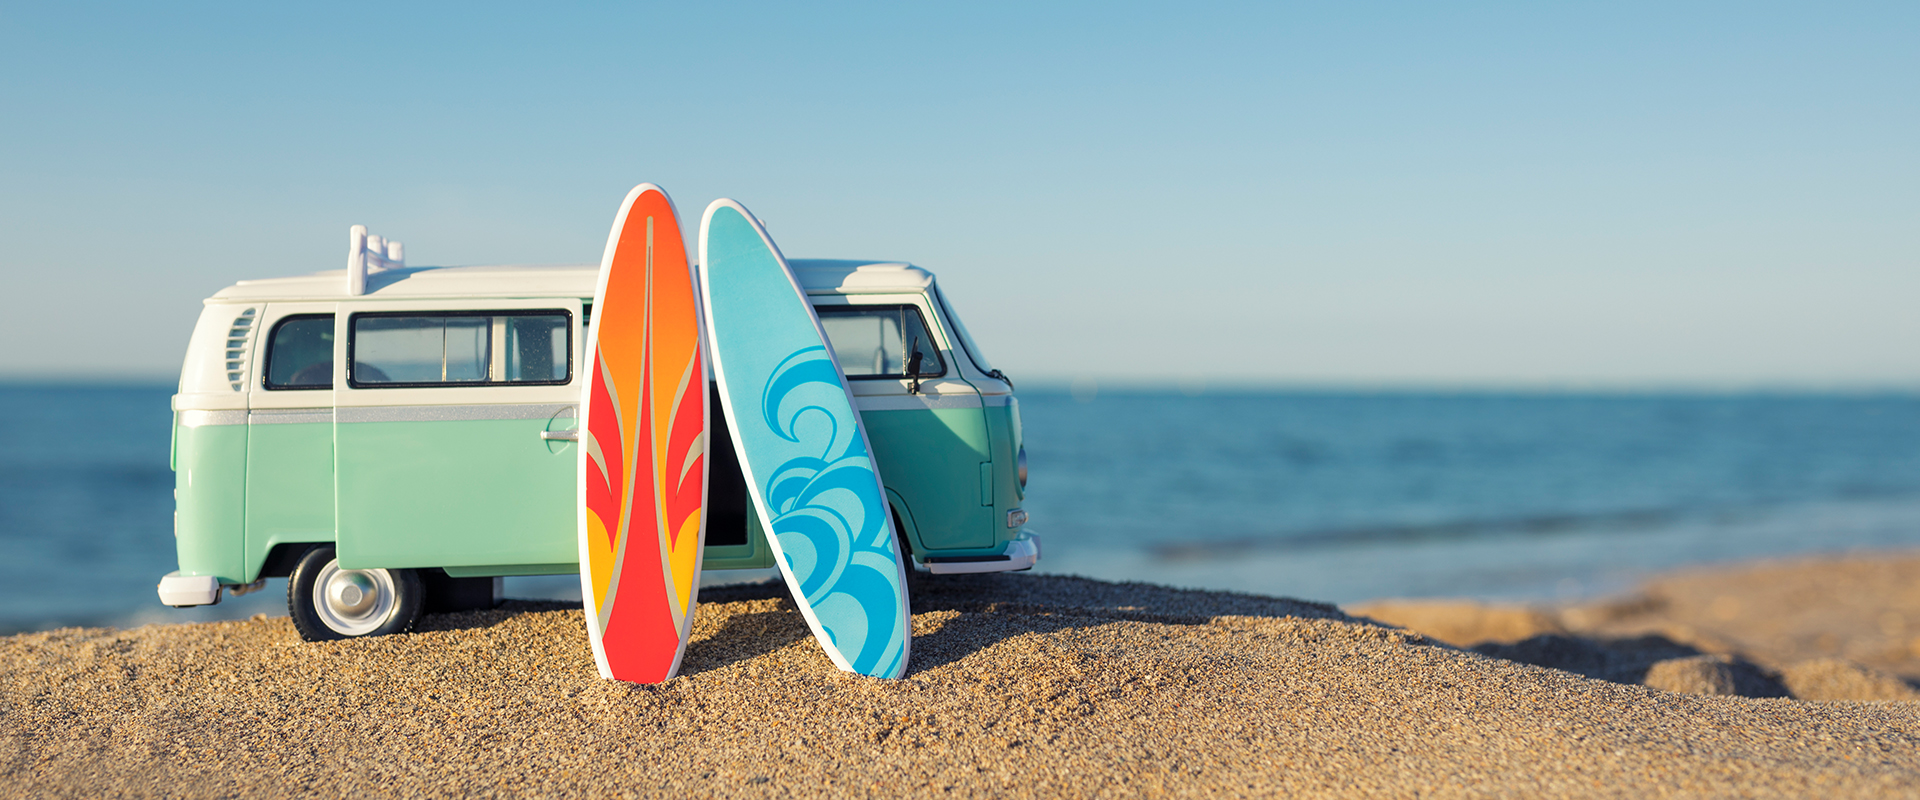 surfboards and van at beach